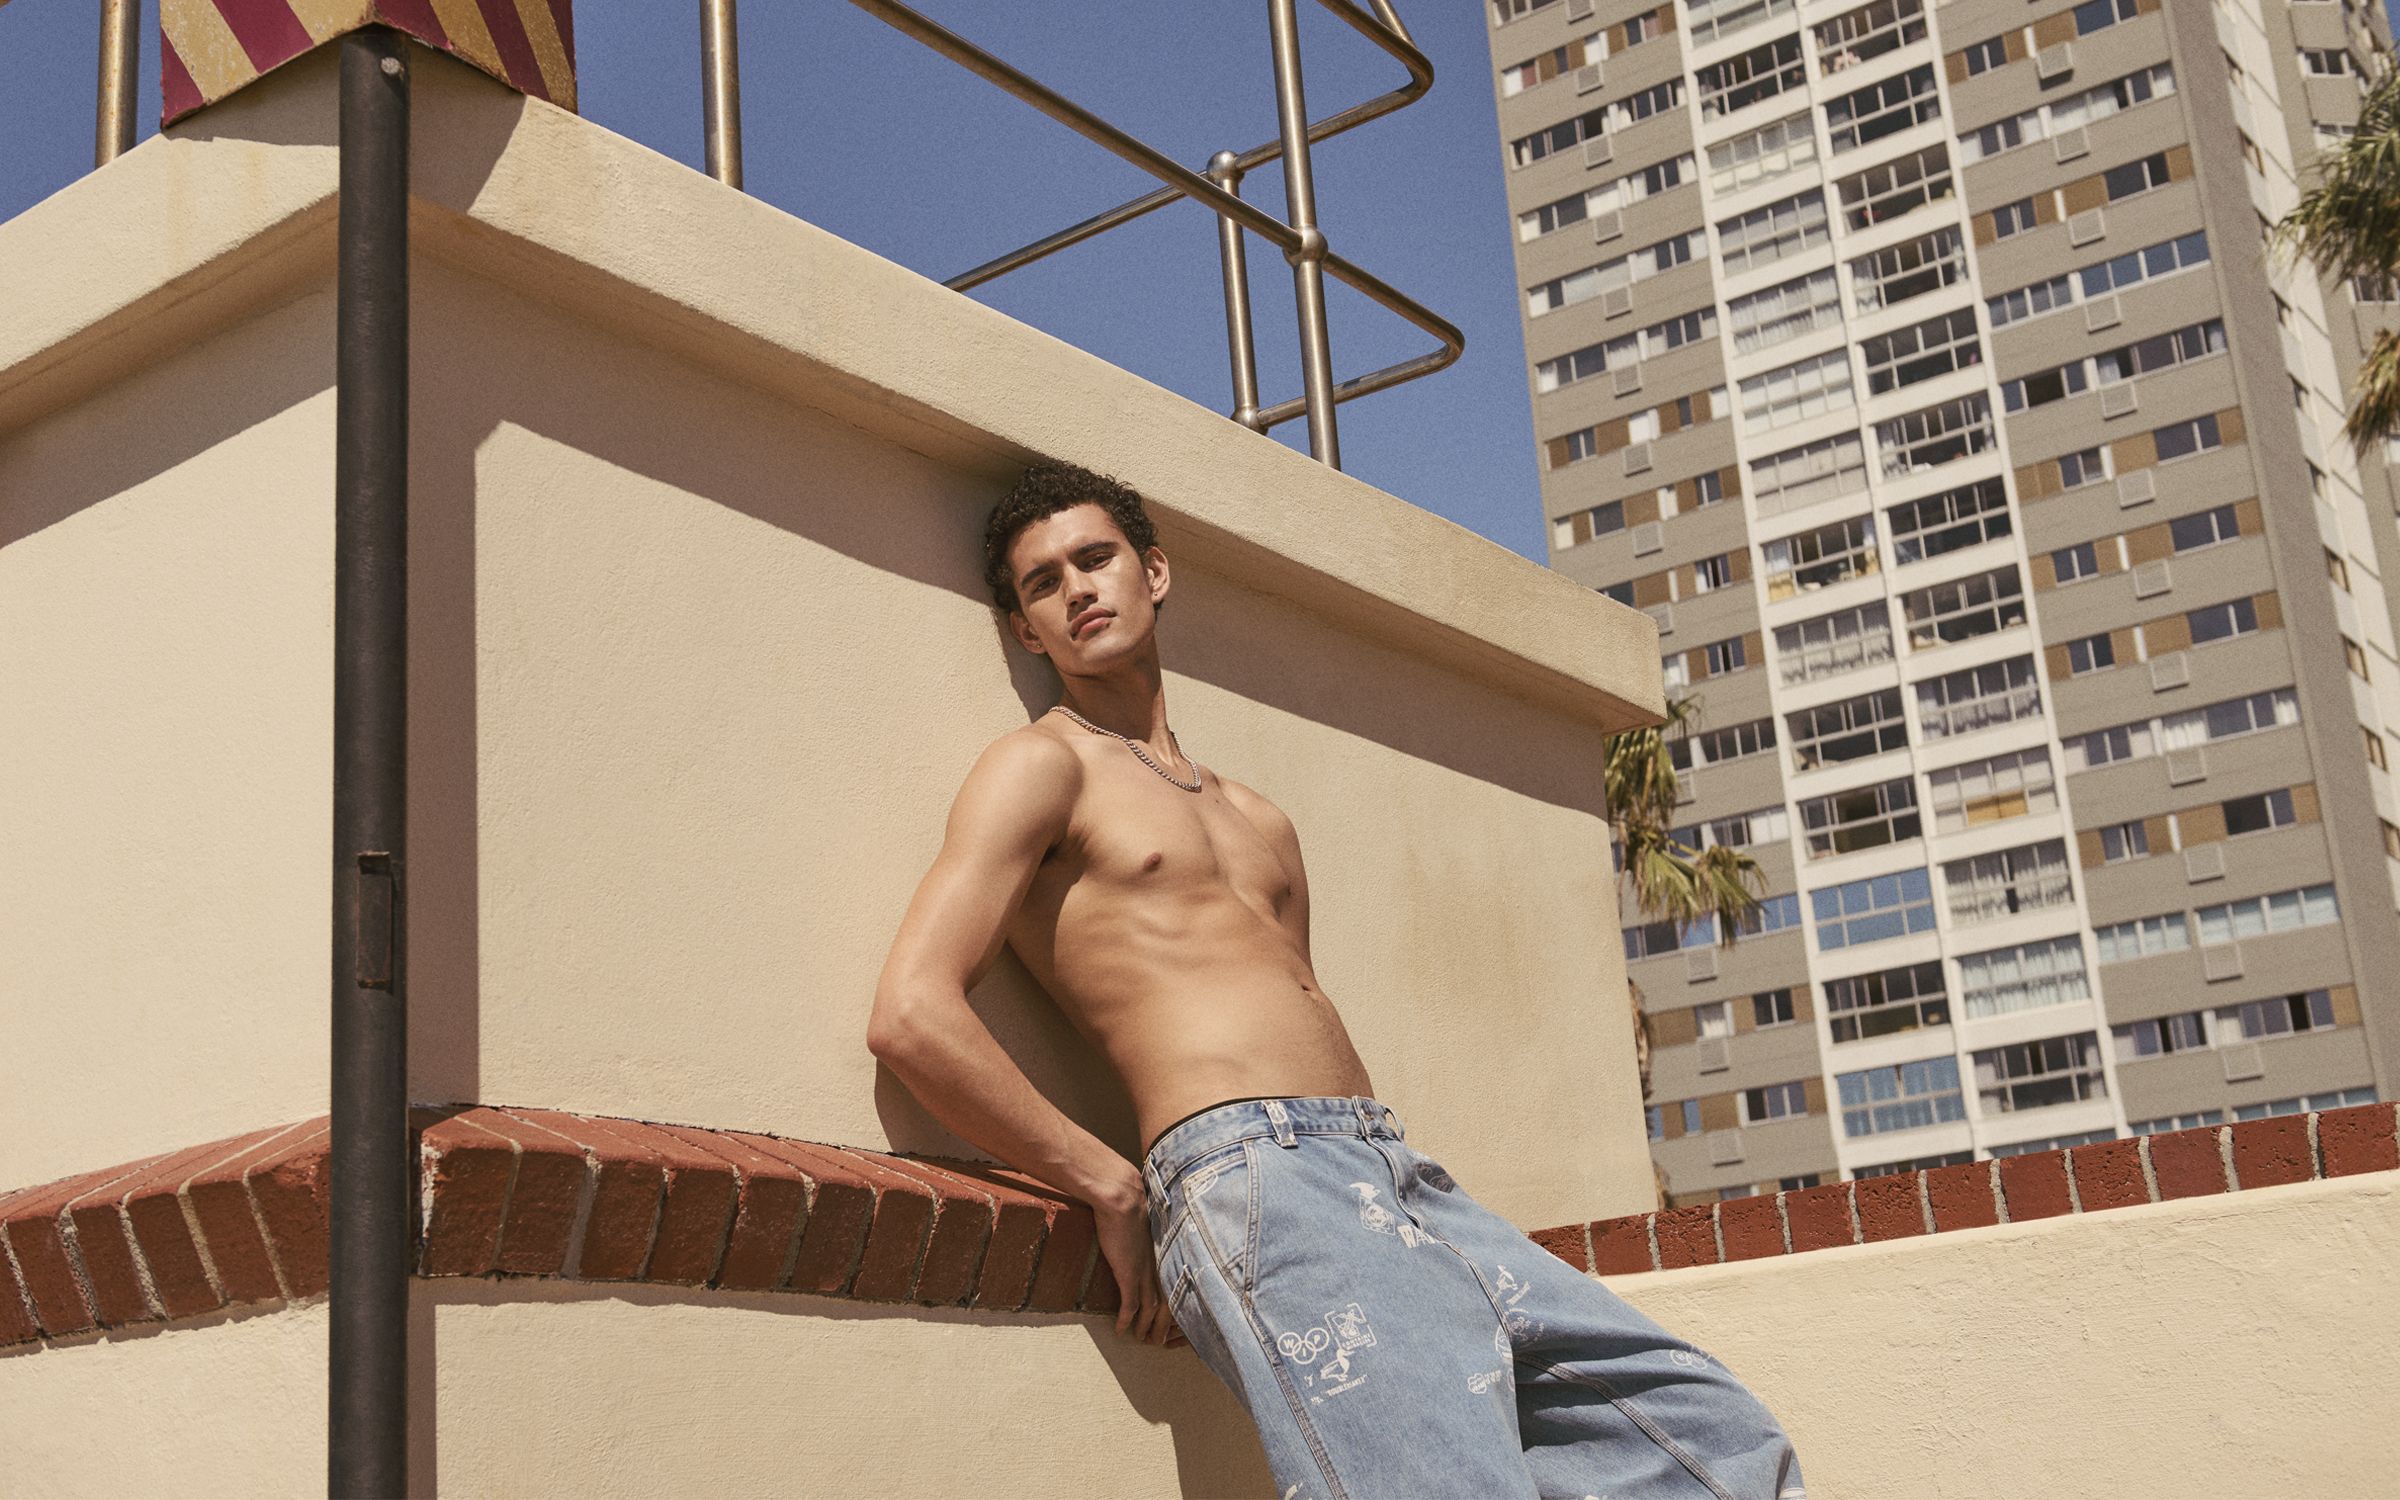 Image of a topless man leaning up against a wall